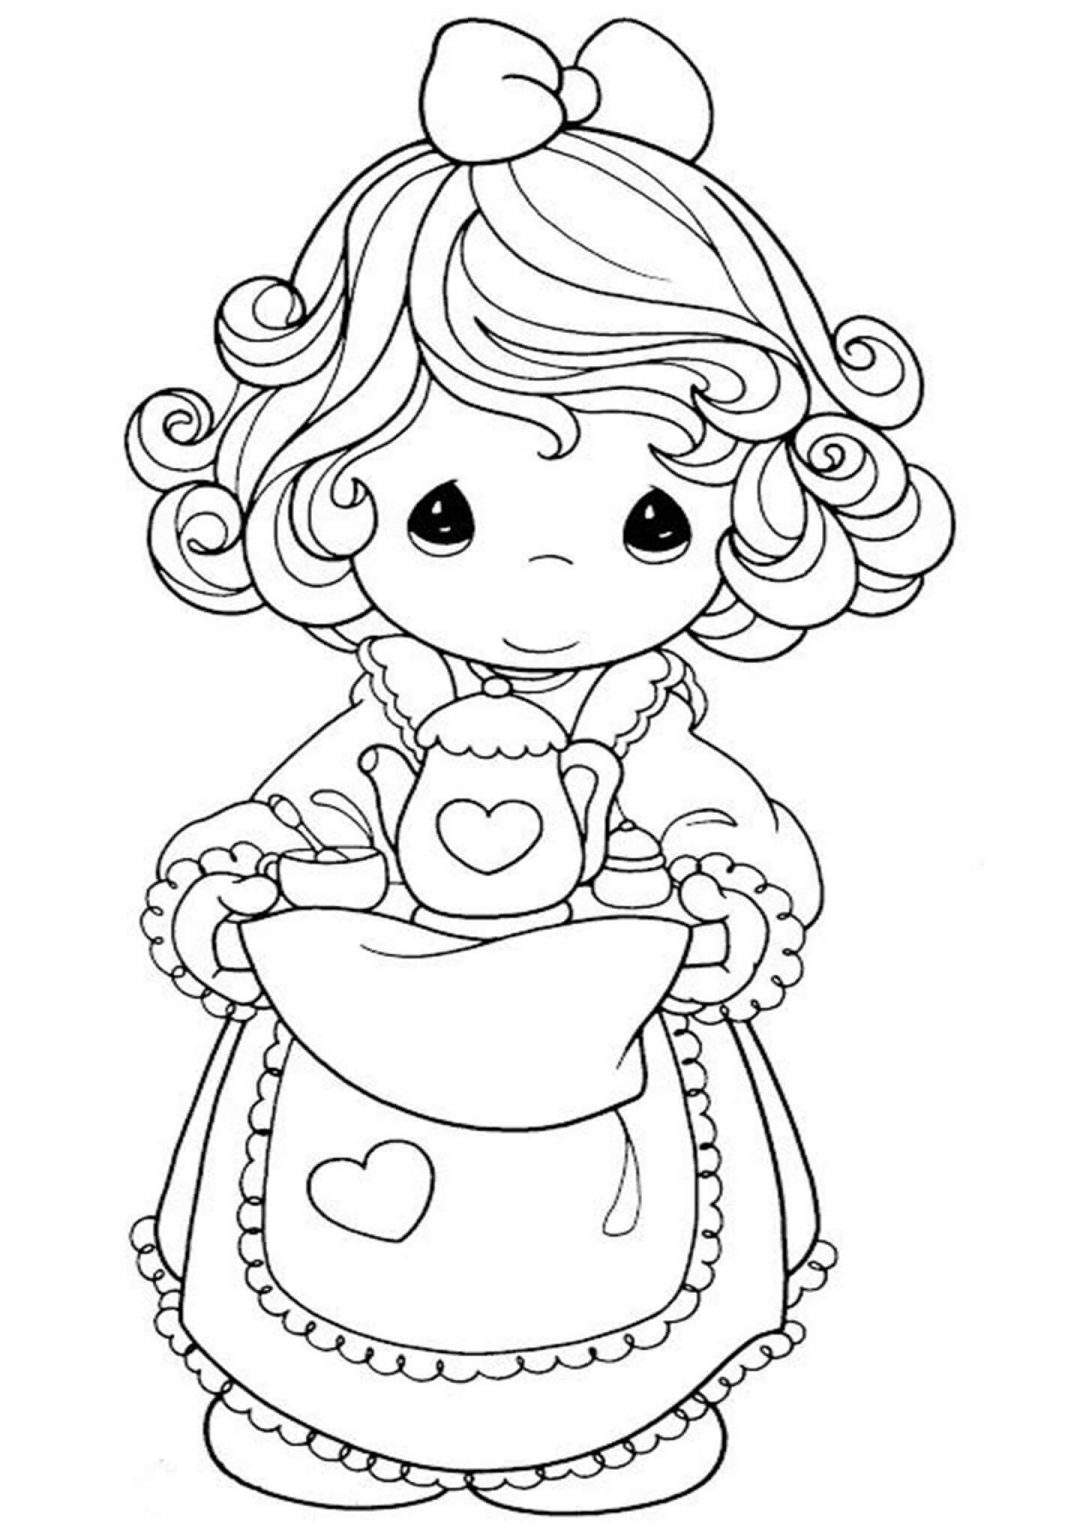 free-easy-to-print-precious-moments-coloring-pages-tulamama